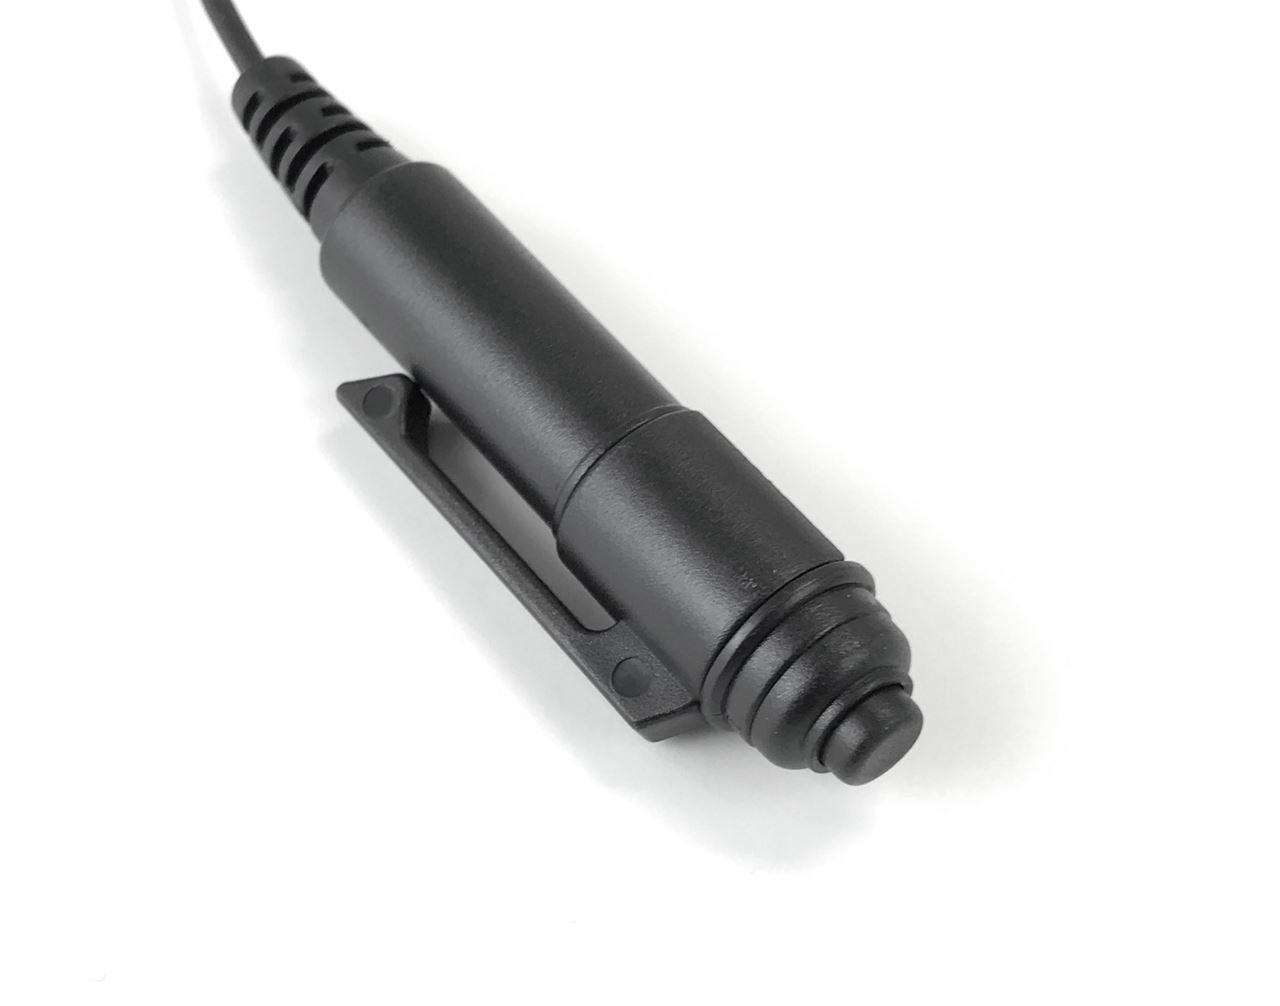 Comparable KHS-12 3 wire mini lapel mic with earphone for use with the Kenwood NX210 Portable Radio - Waveband Communications